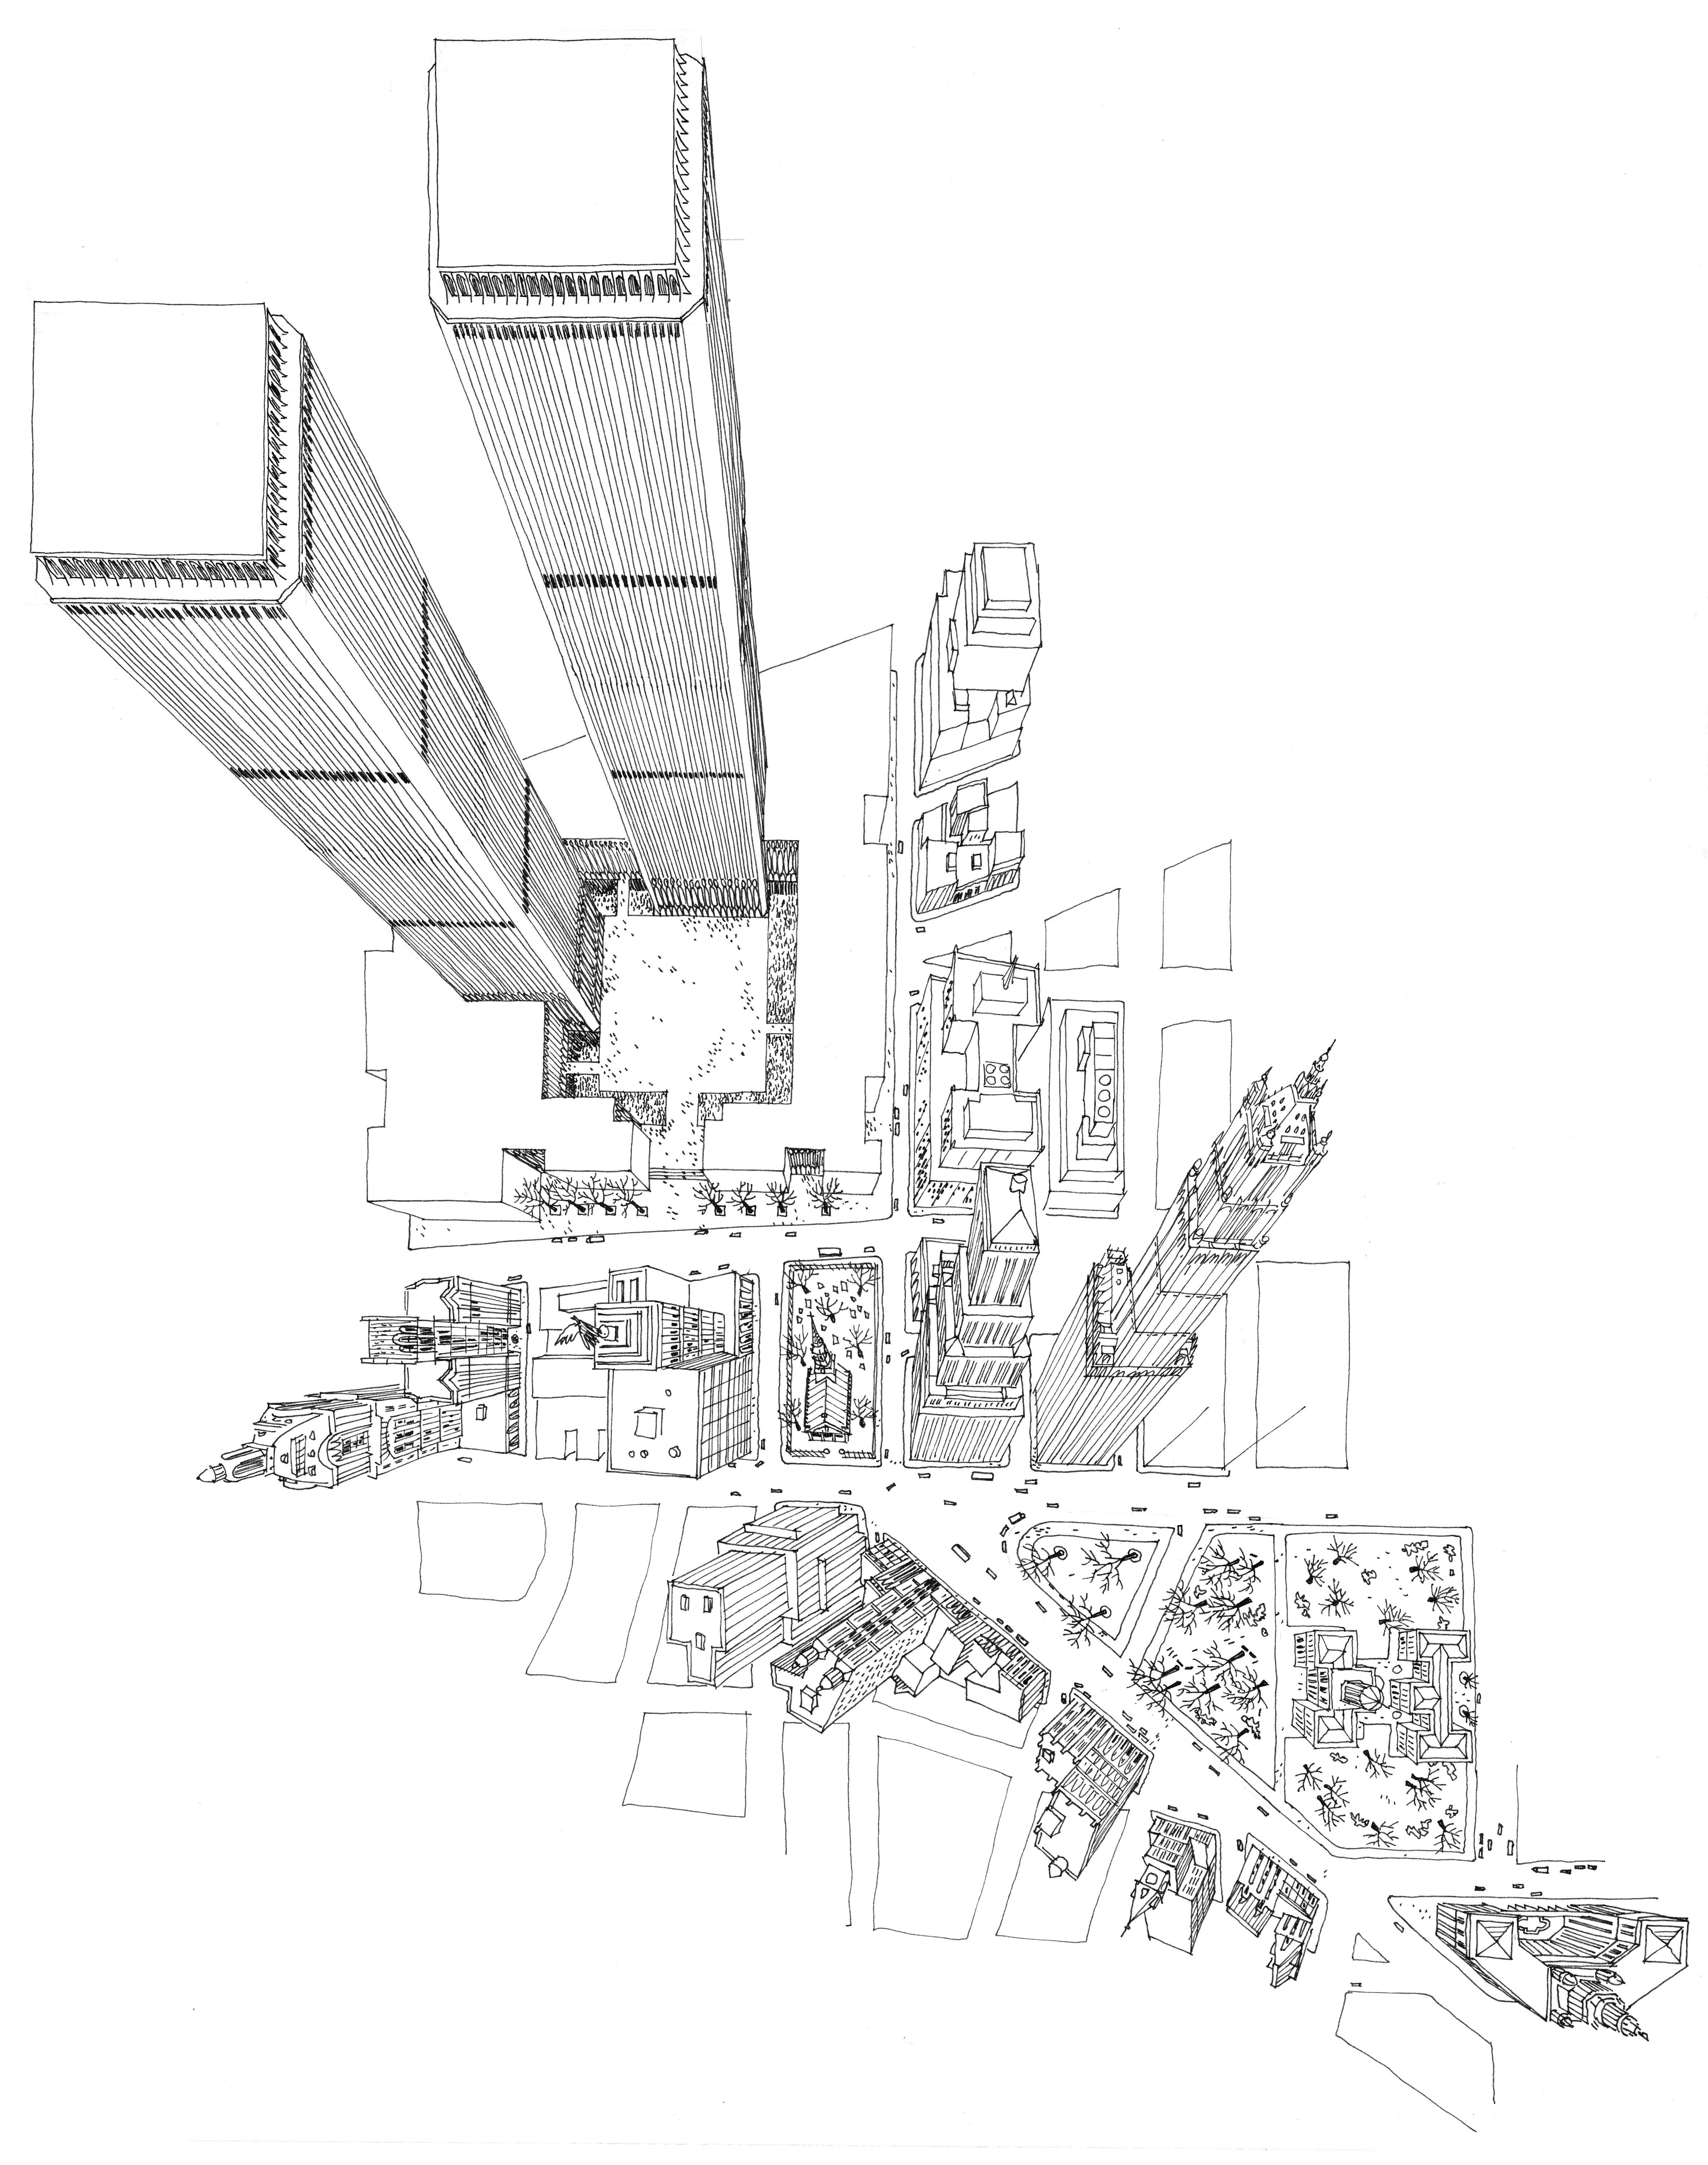 Drawings of World Trade Center